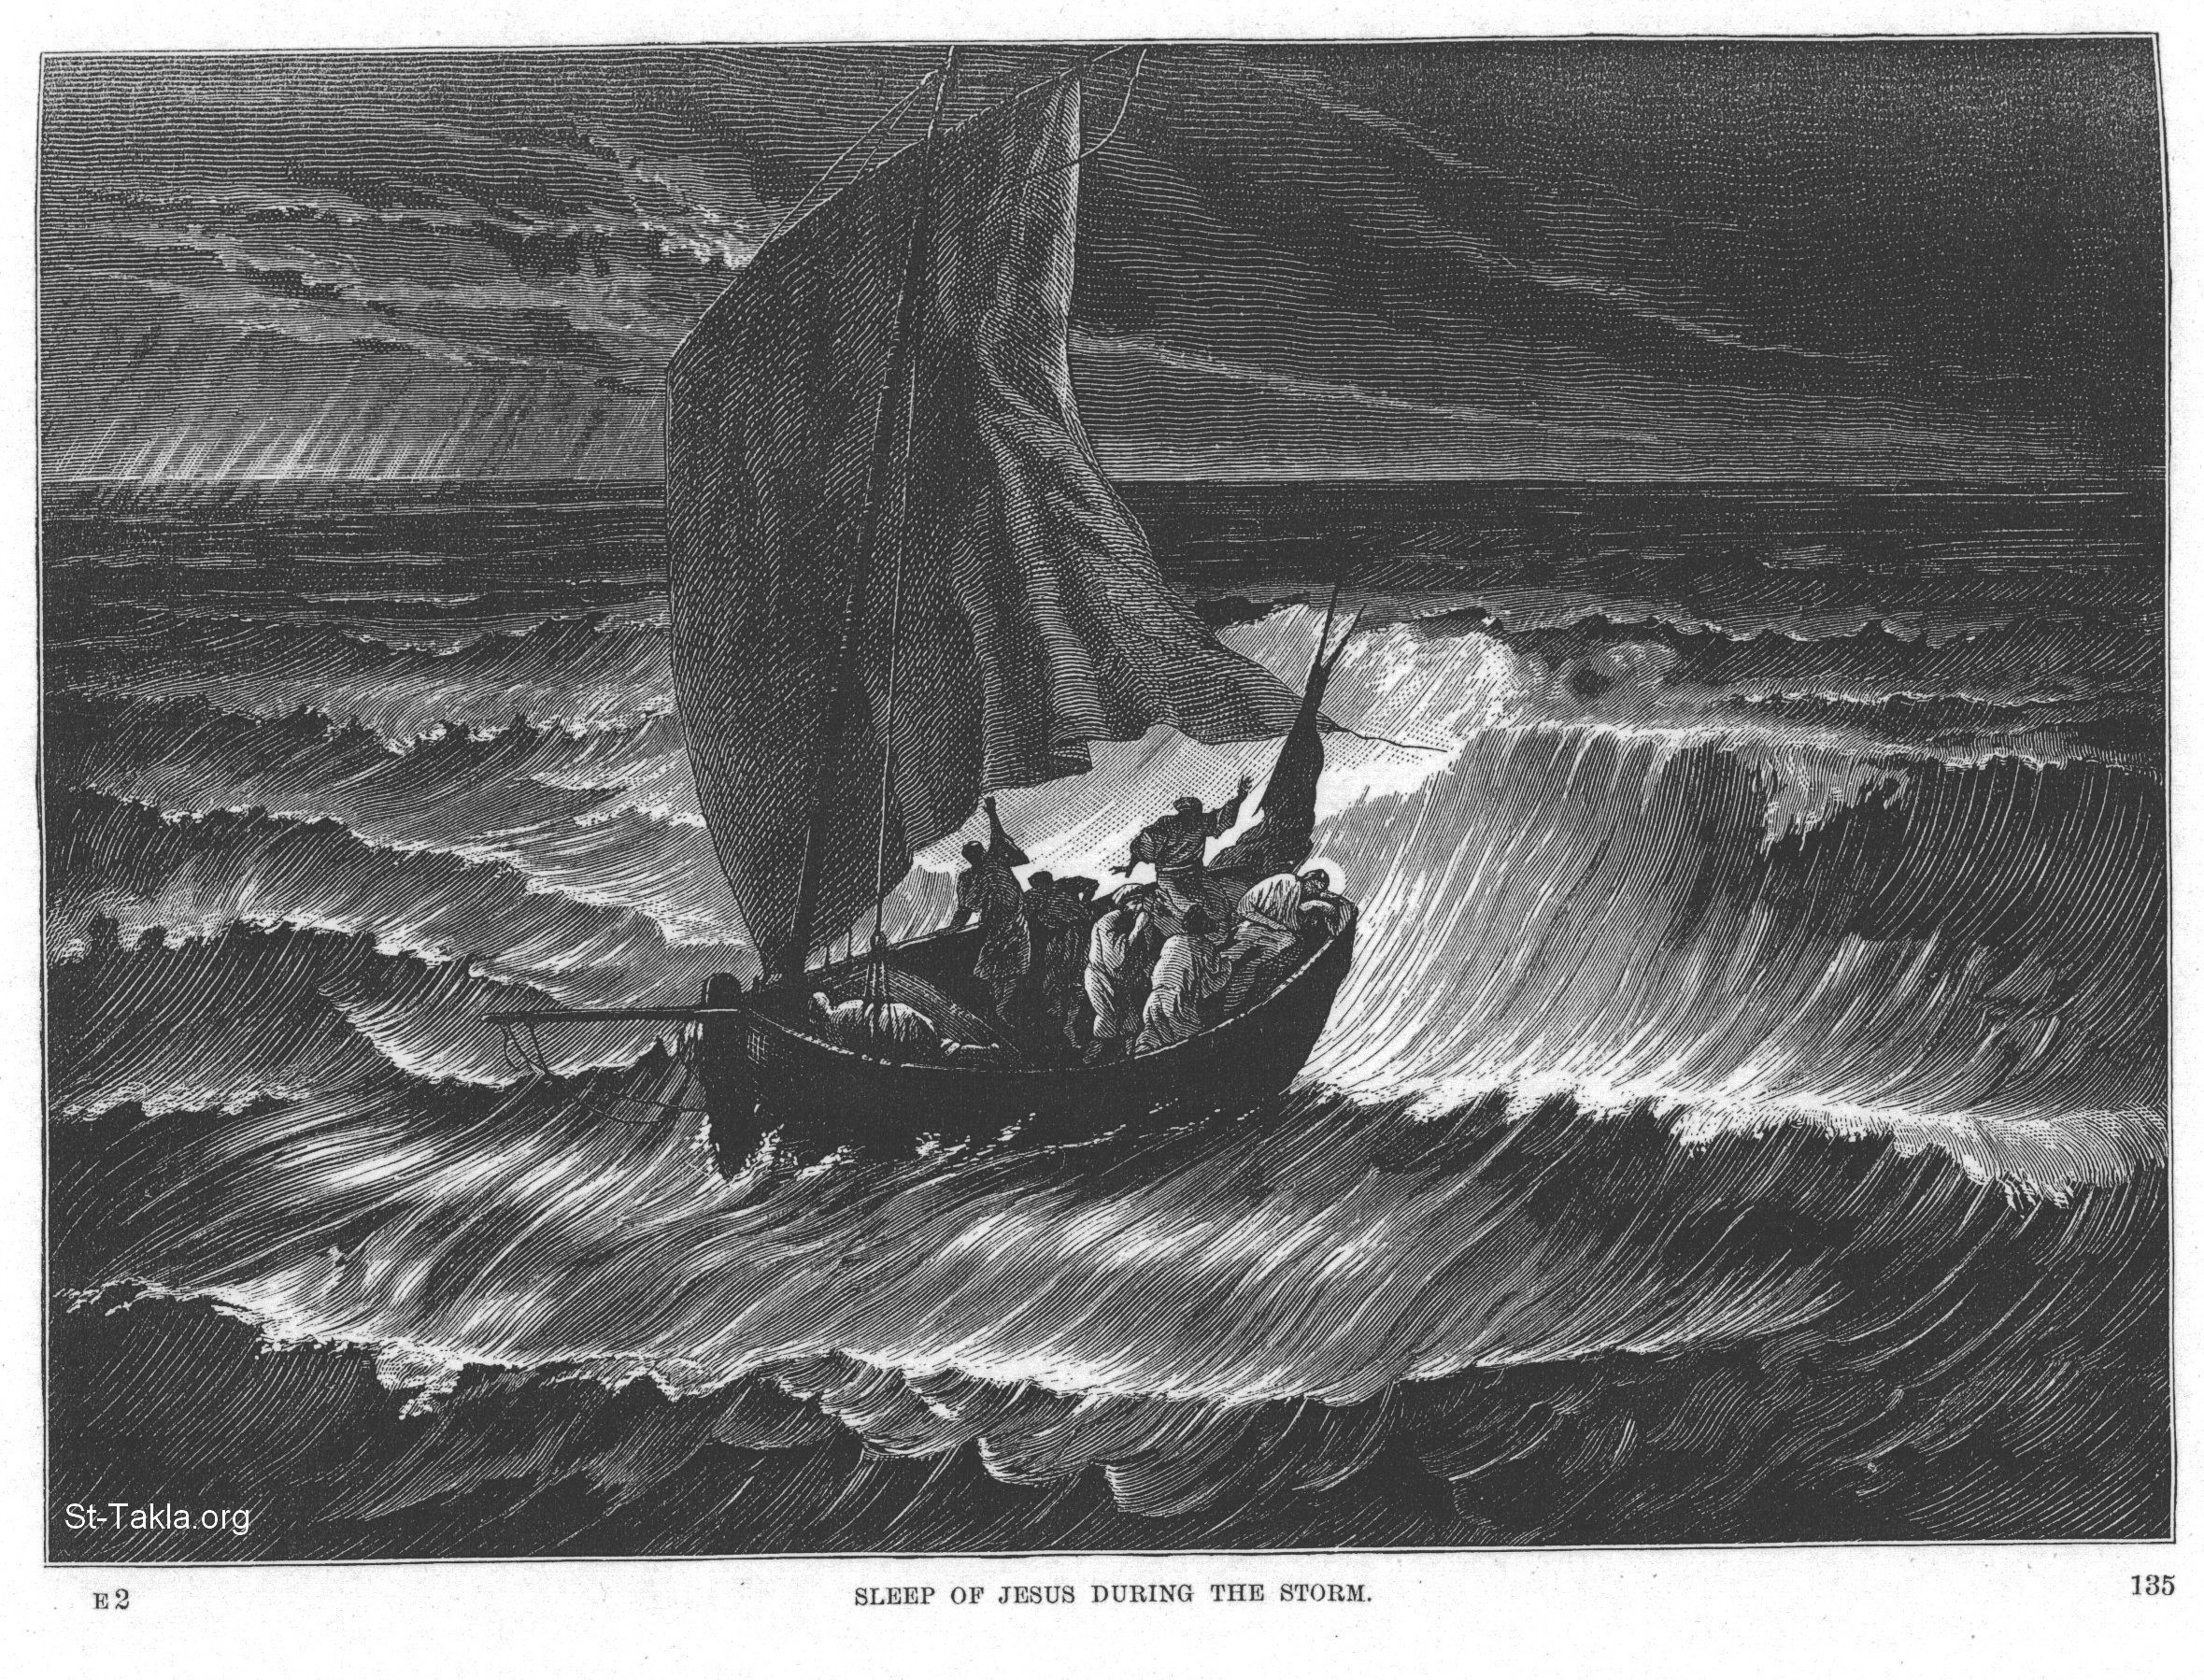 Christ is sleeping in the Boat Storm